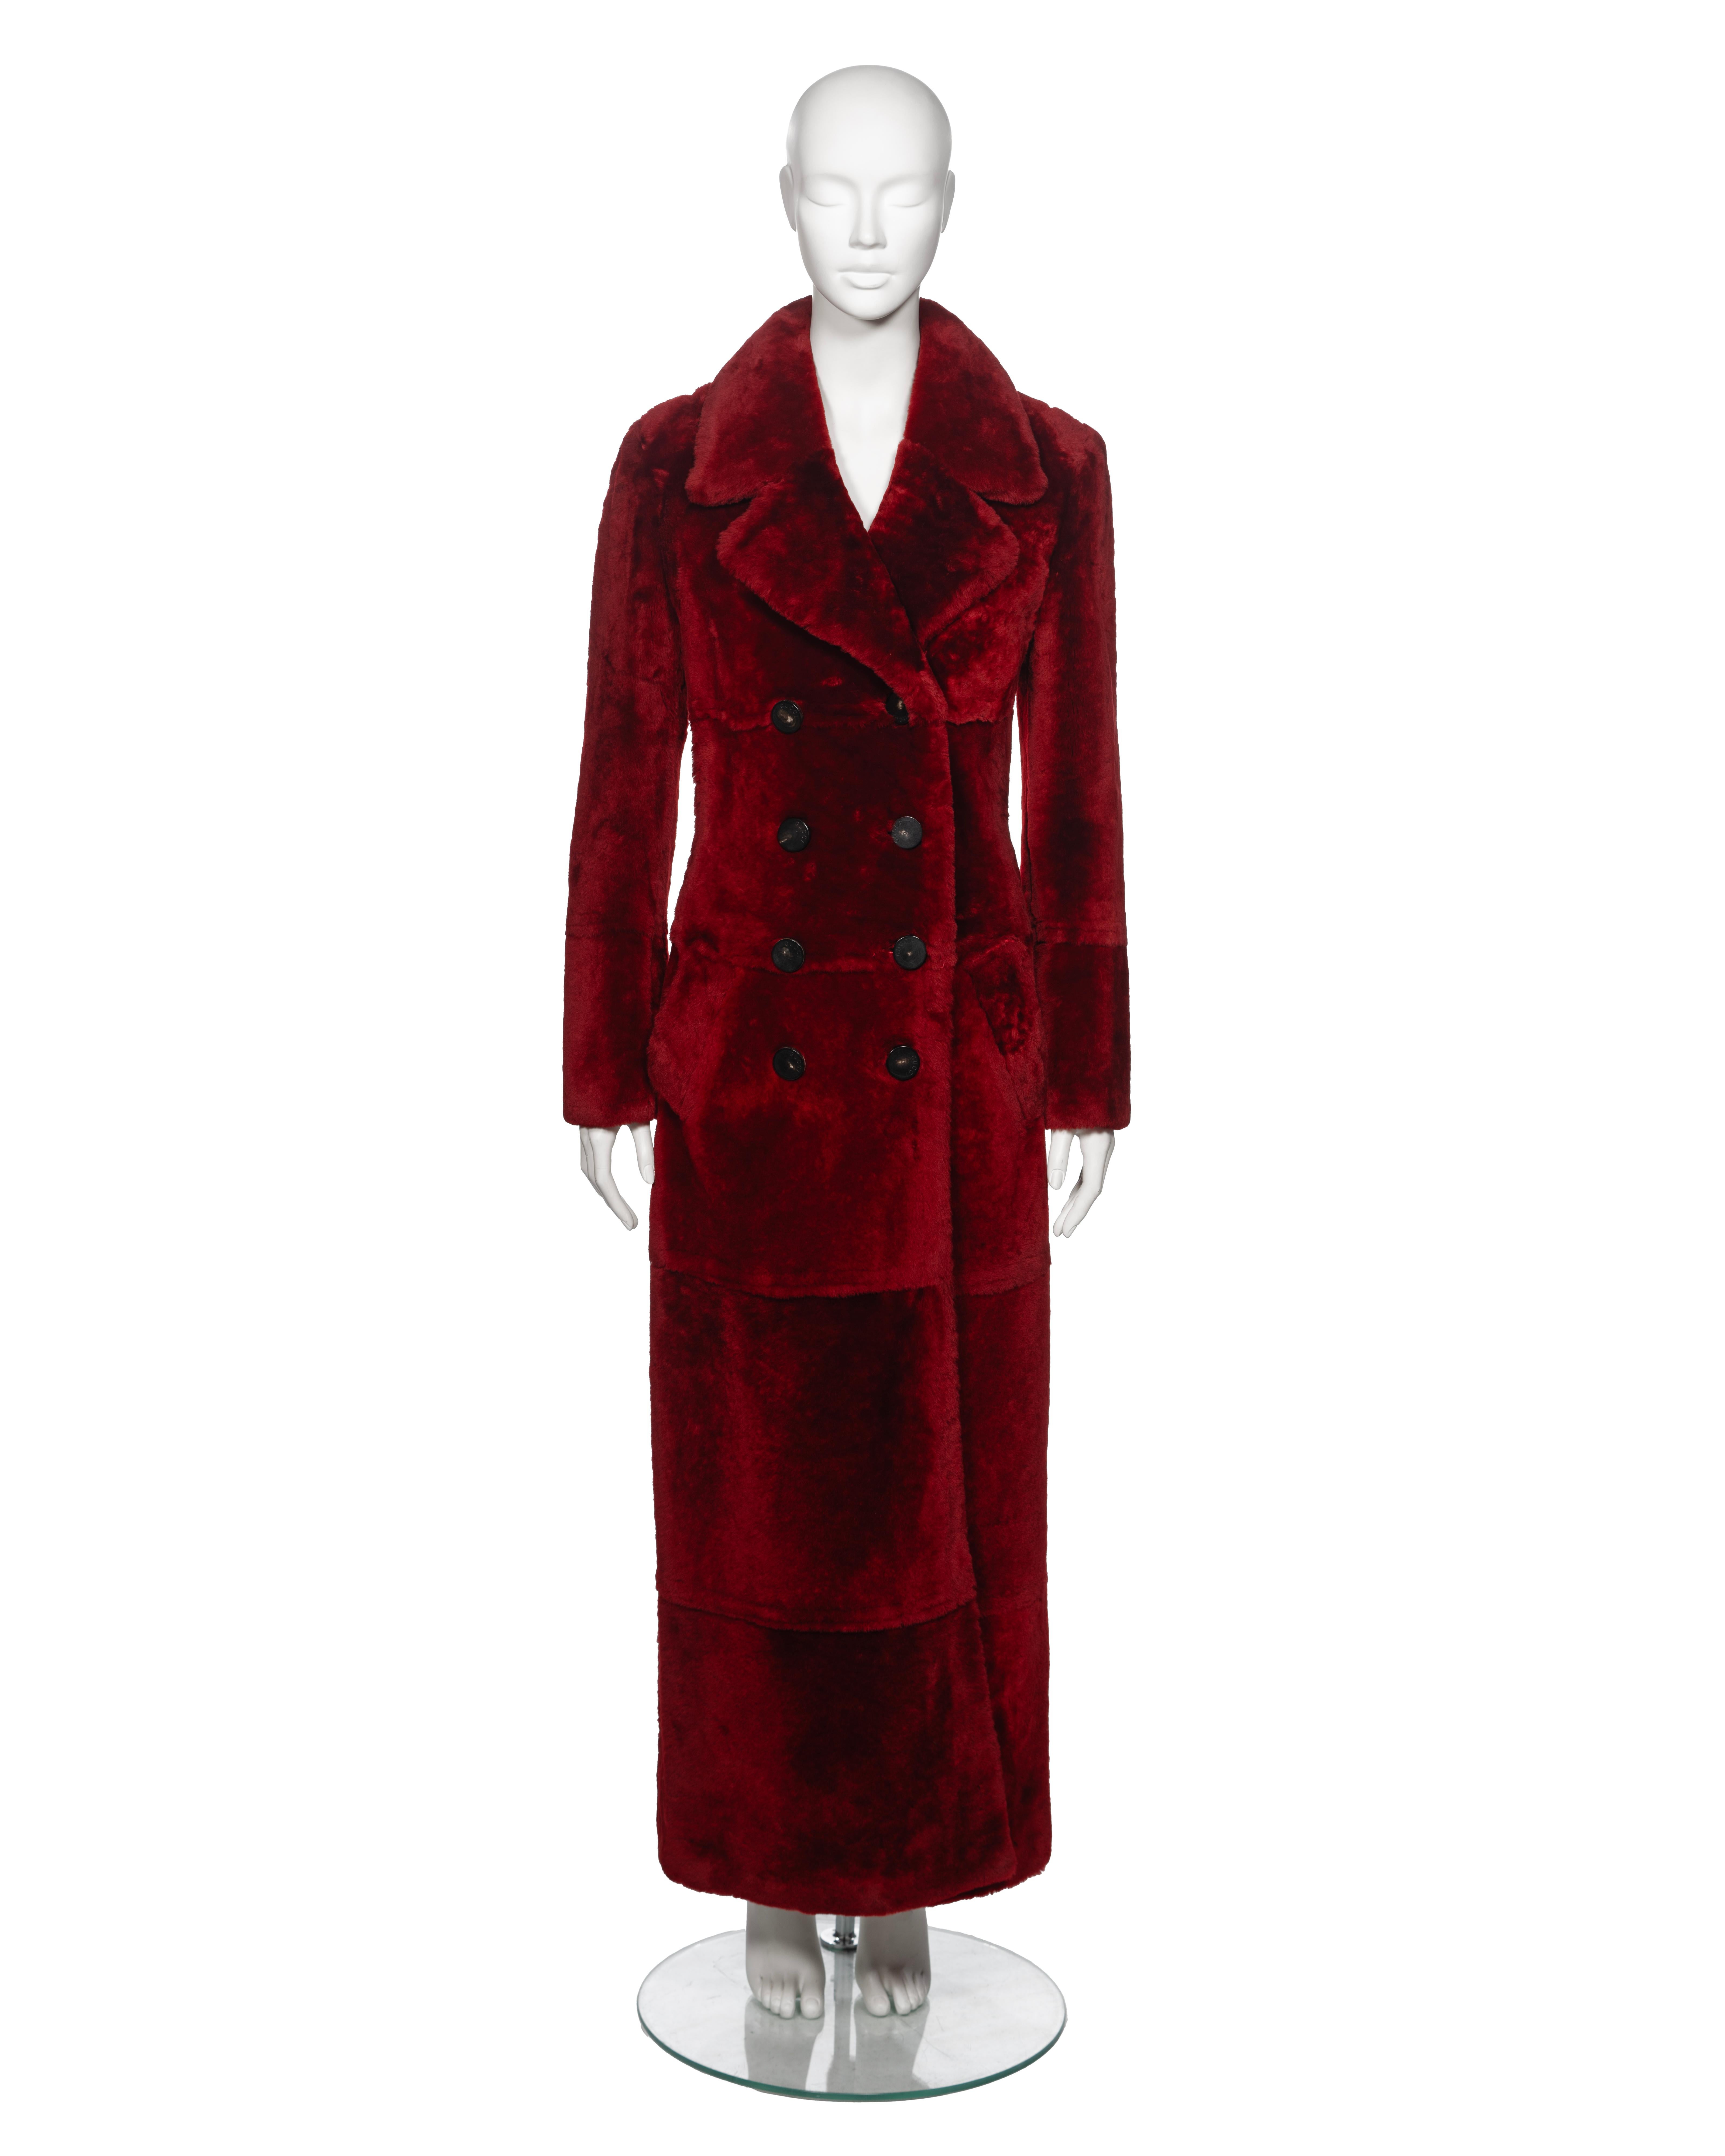 ▪ Archival Gucci Runway Coat
▪ Creative Director: Tom Ford
▪ Fall-Winter 1996
▪ Crafted from multiple panels of red-dyed sheepskin with a leather backing, this coat exudes luxurious quality
▪ Featuring a double-breasted design with branded horn